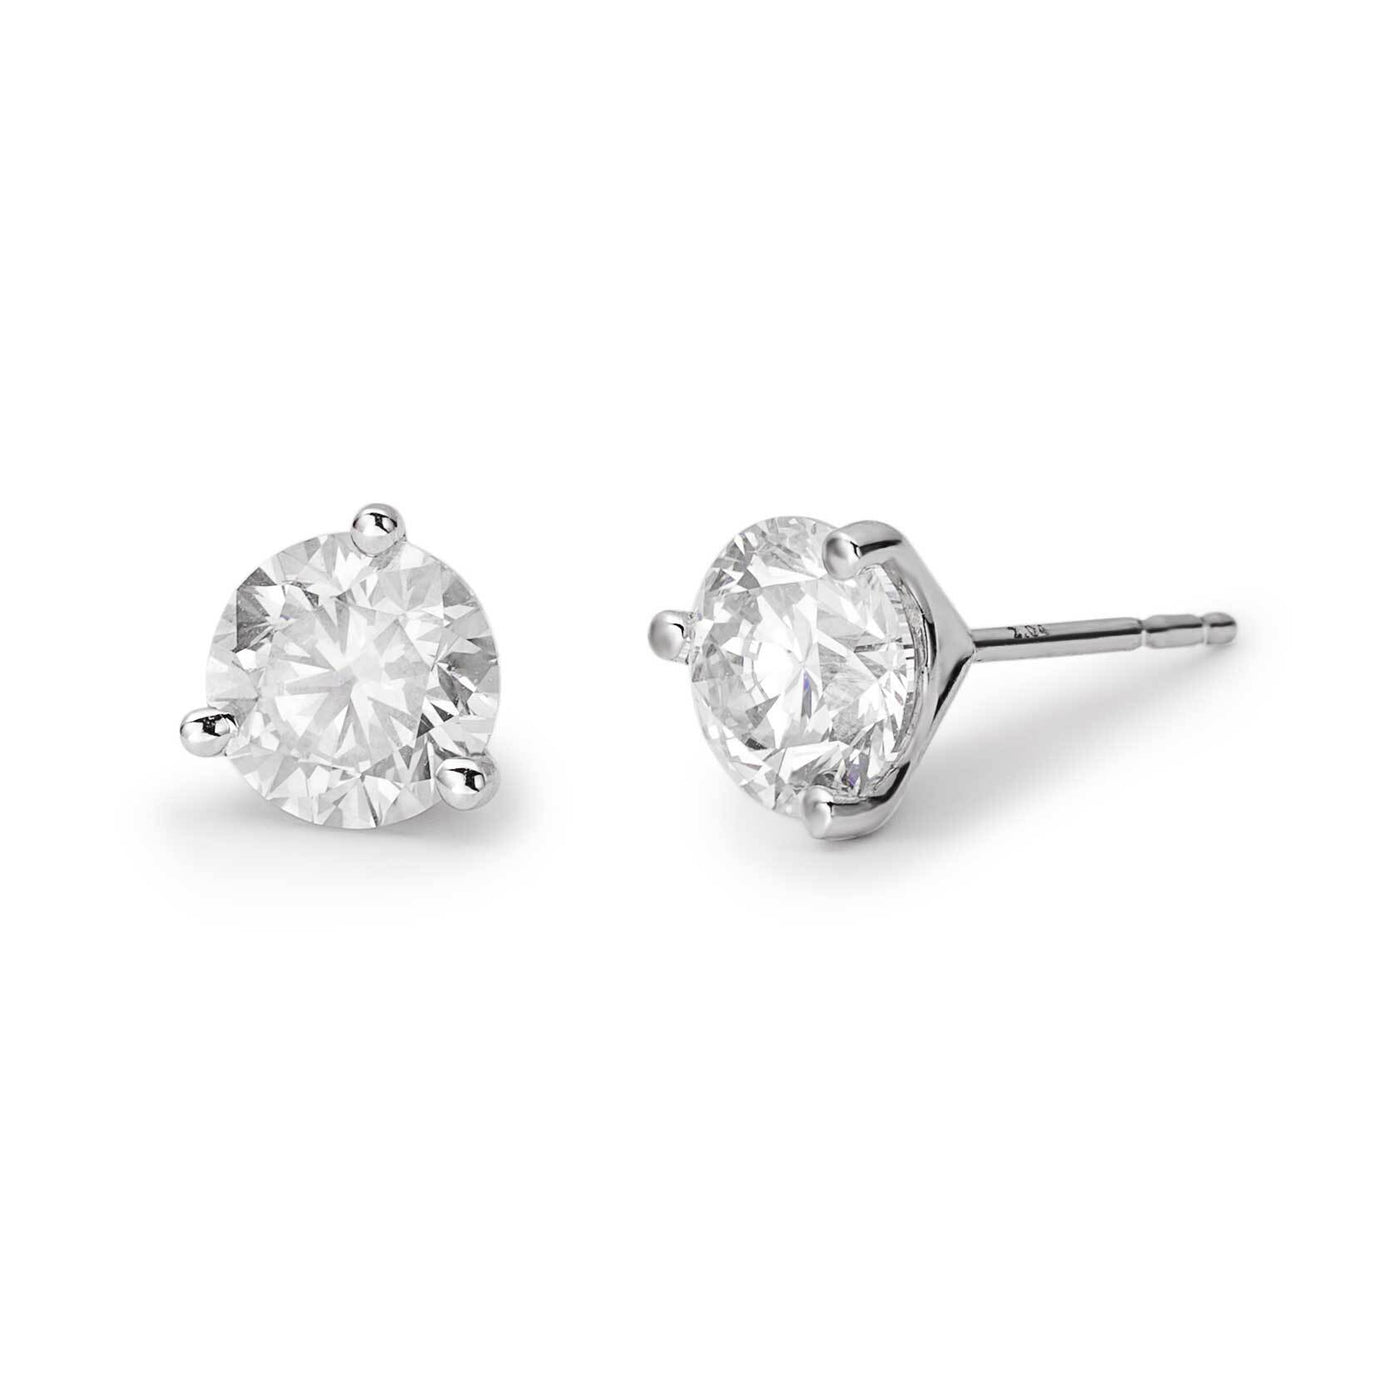 Round Cut Solitaire Diamond Stud Earrings 2.04ctw 14K White Gold